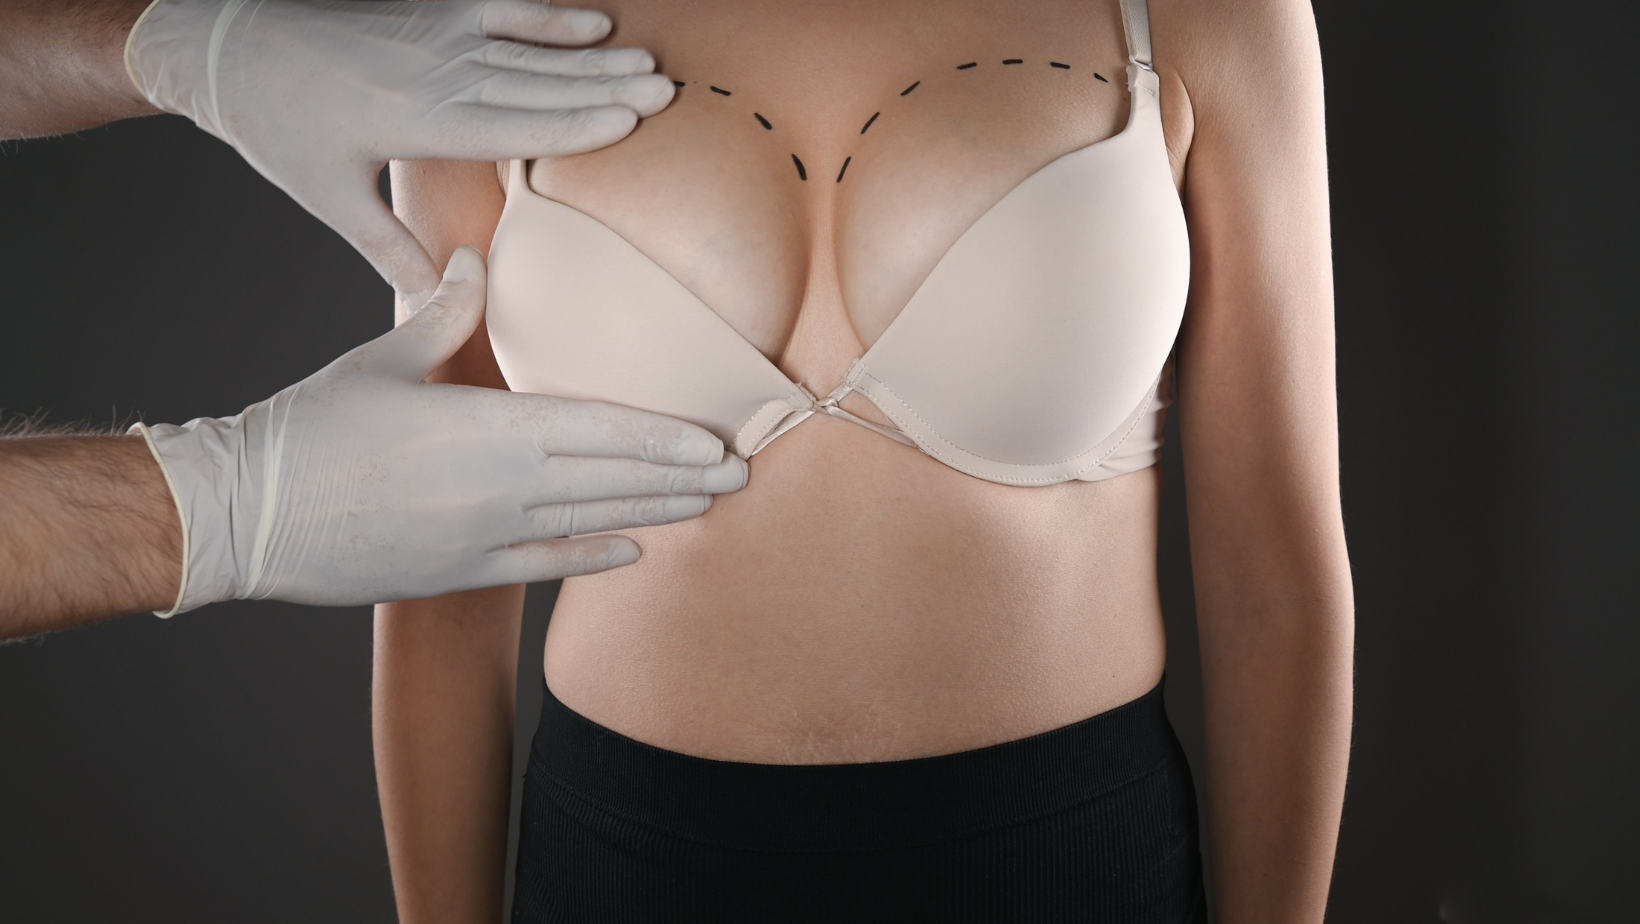 Generic Silicone Breast Forms Post Bra Chest Enlarging @ Best